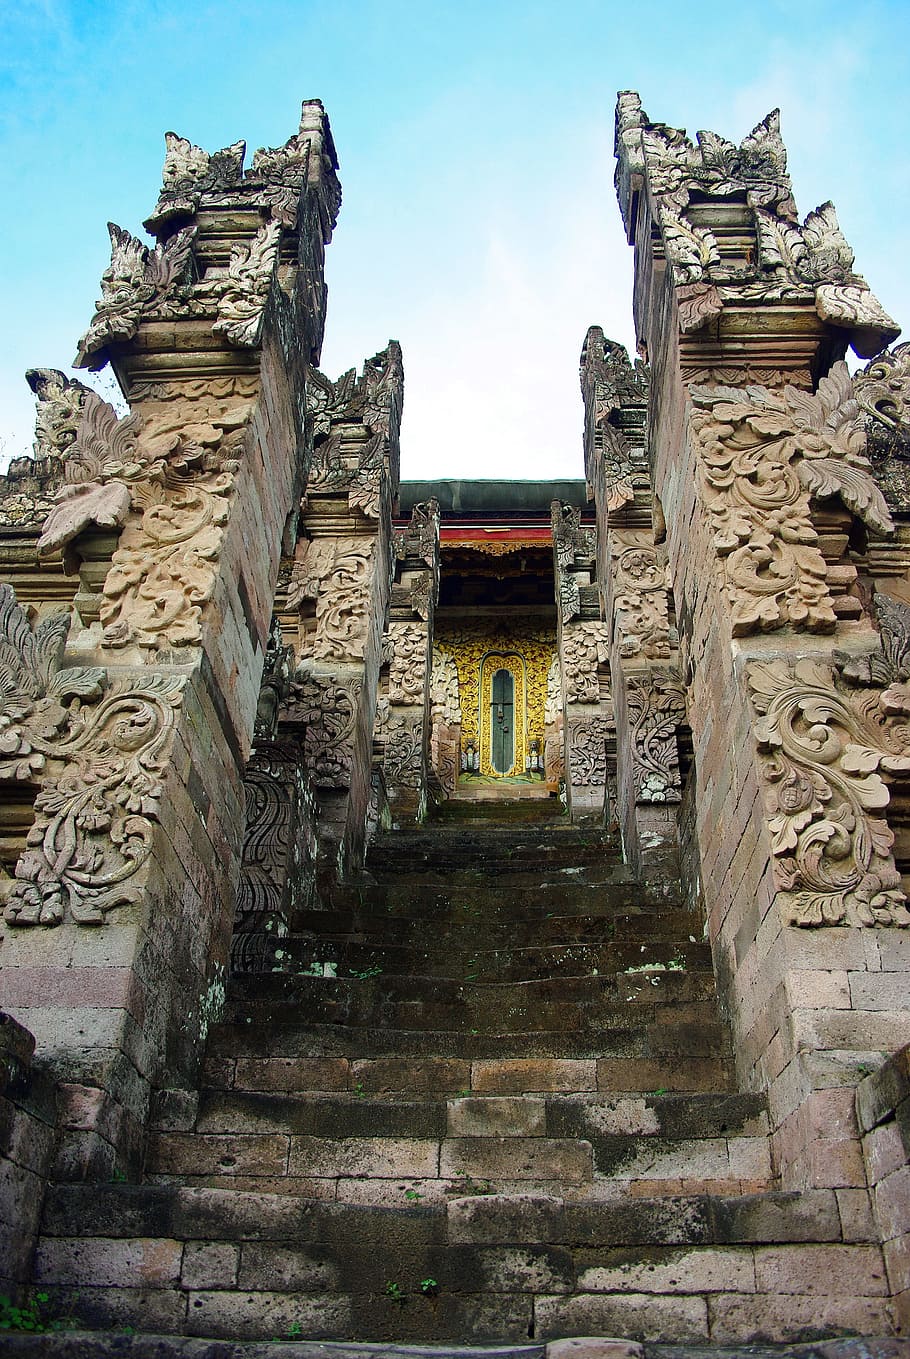 bali, temple, religion, indonesia, sacred, architecture, built structure, building exterior, history, the past